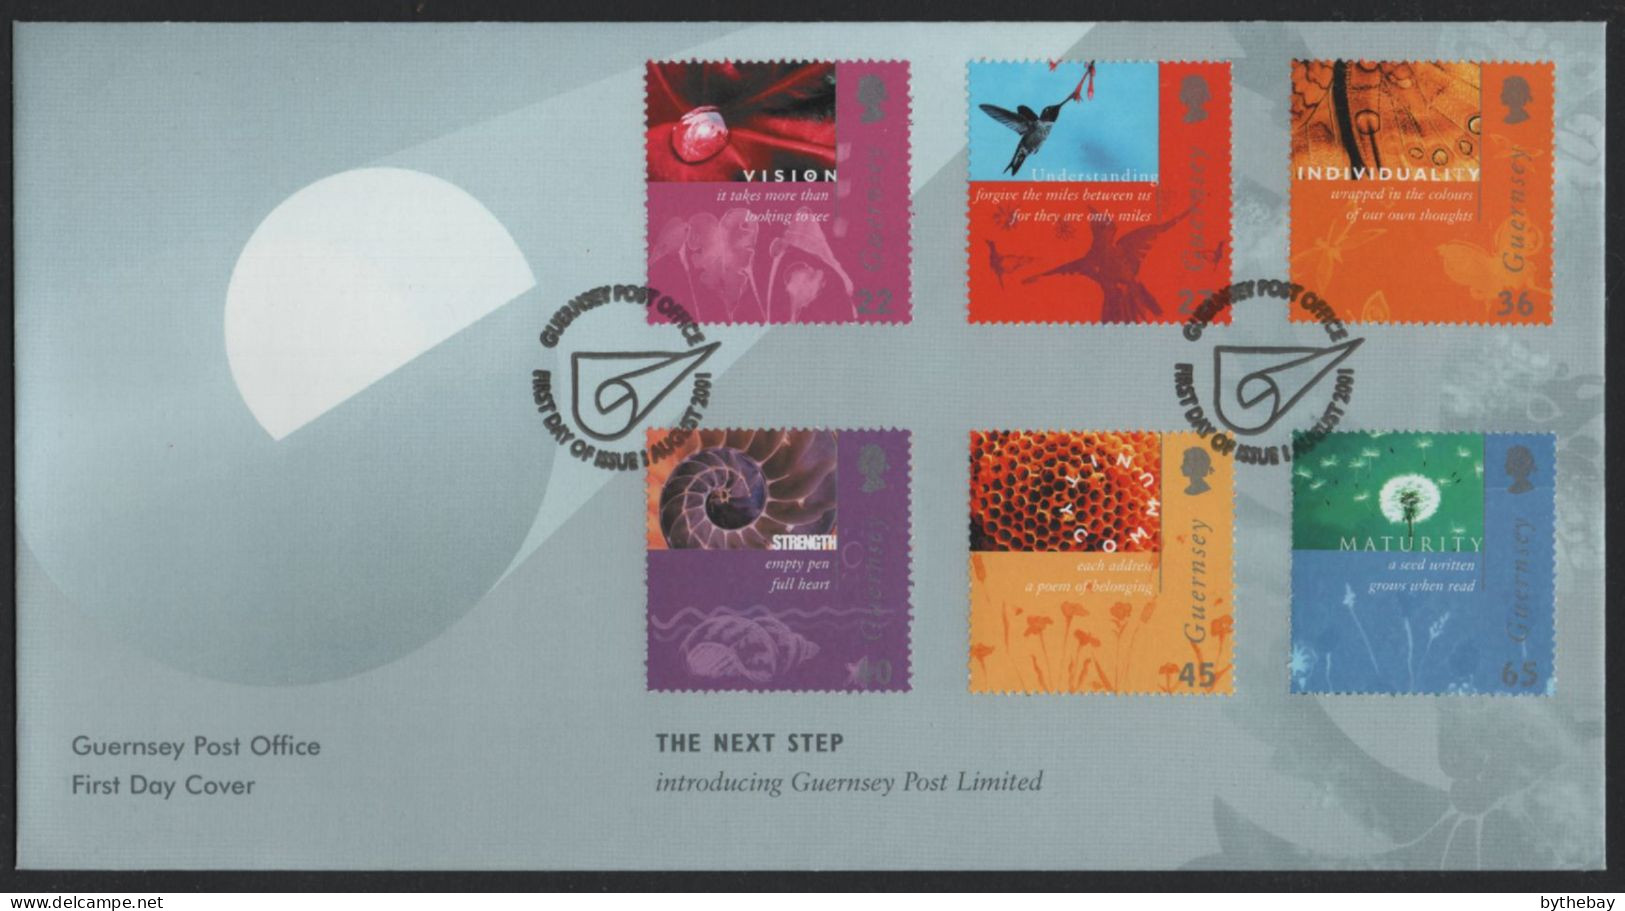 Guernsey 2001 FDC Sc 743-748 Guernsey Post Limited Introduction - Guernsey